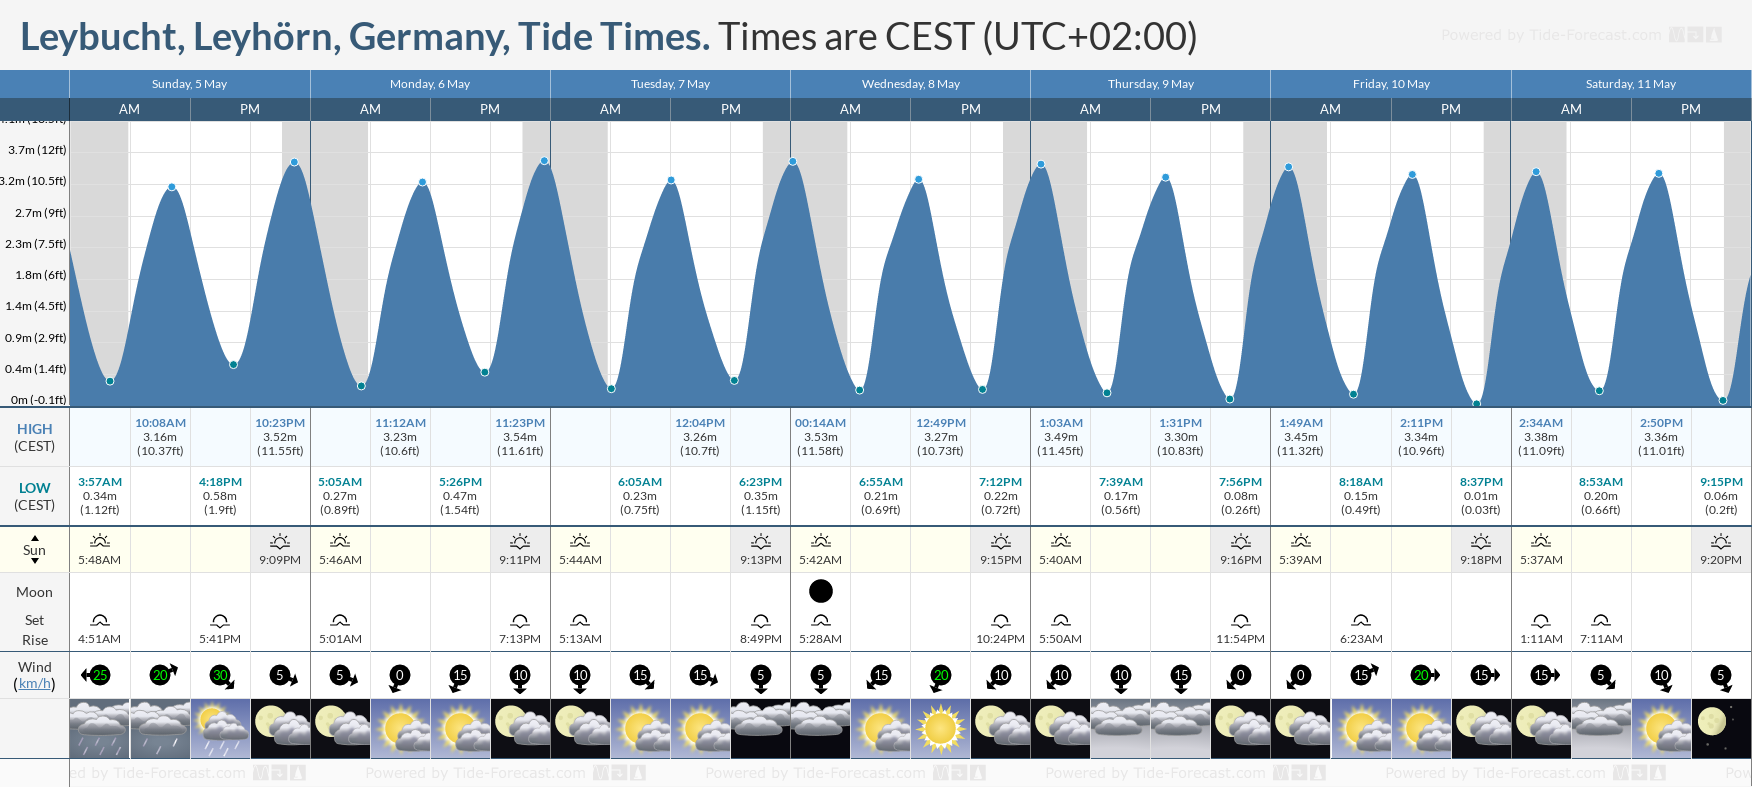 Leybucht, Leyhörn, Germany Tide Chart including high and low tide tide times for the next 7 days